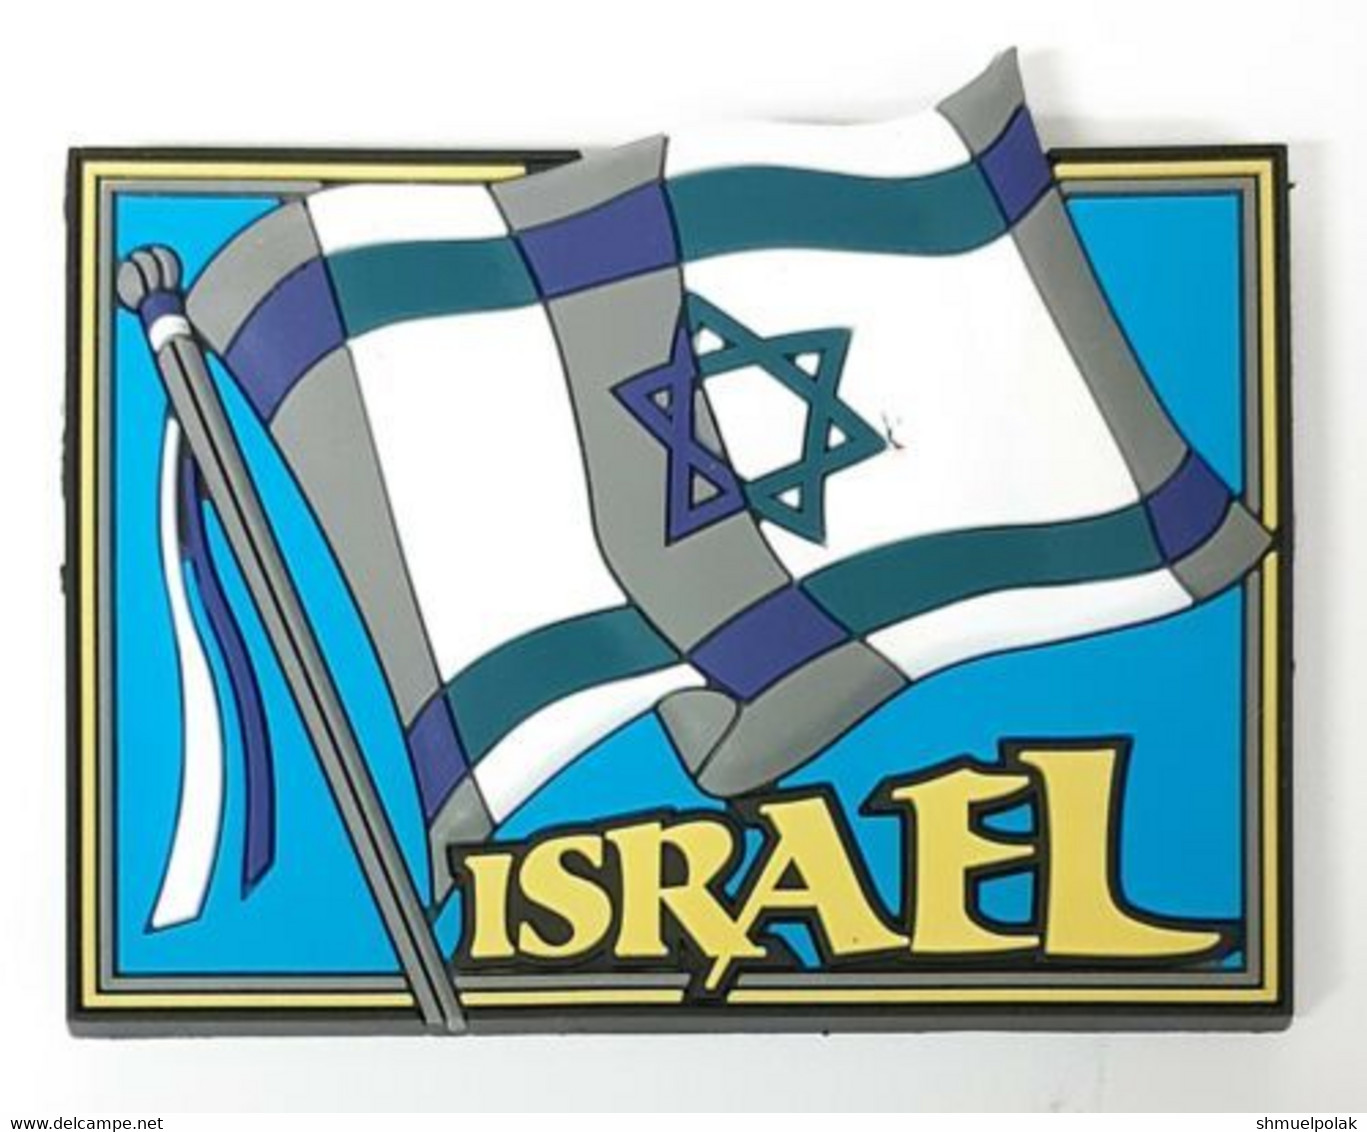 Tourism Souvenir "israel" A Country In The Middle East Fridge Magnet - Tourism